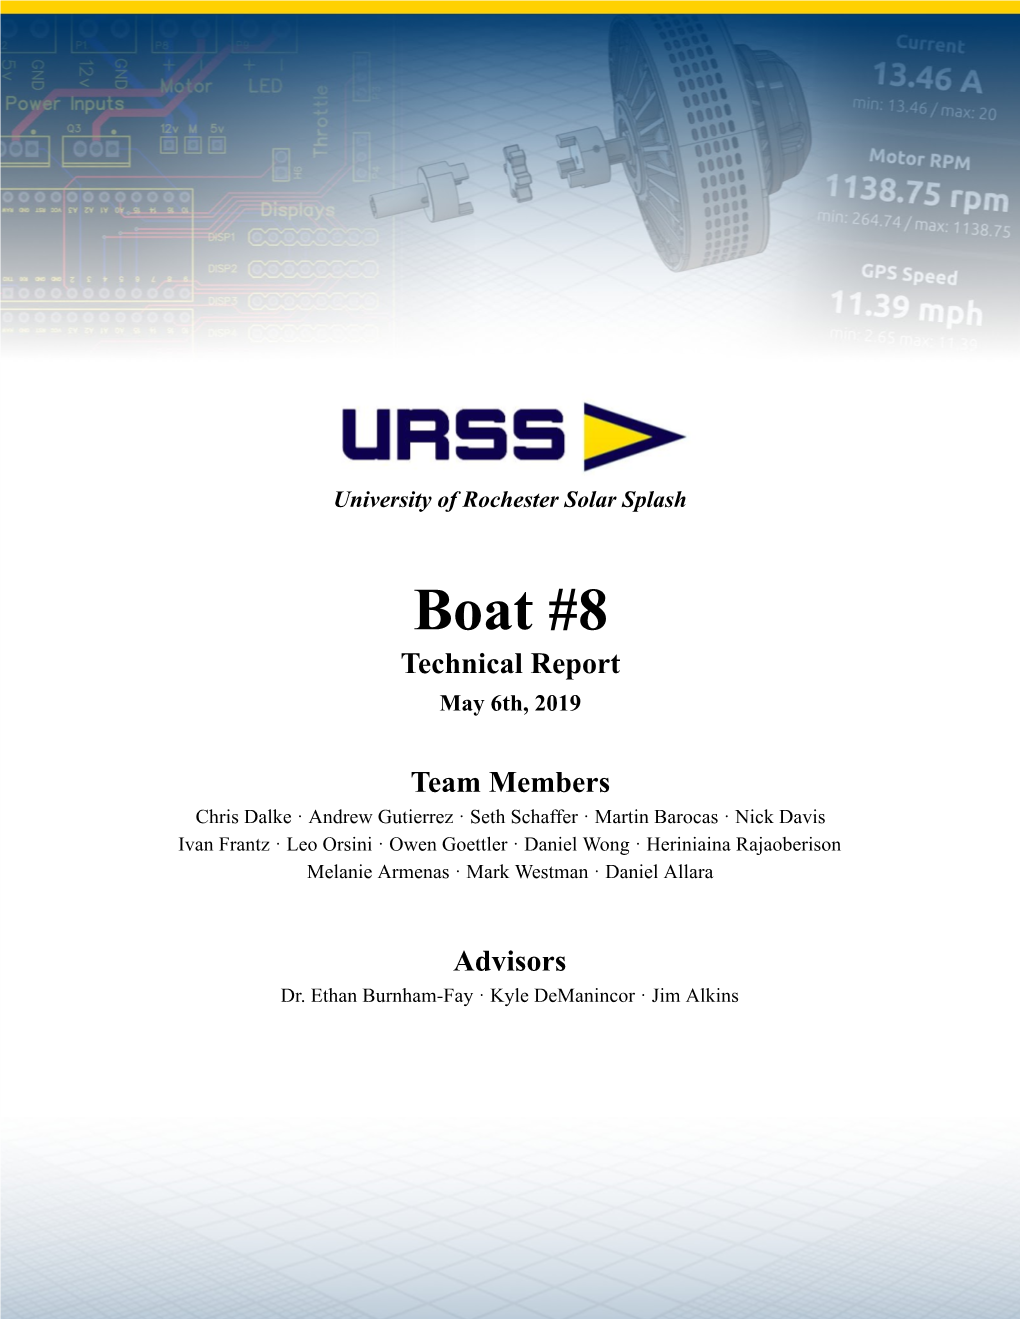 Boat #8 Technical Report